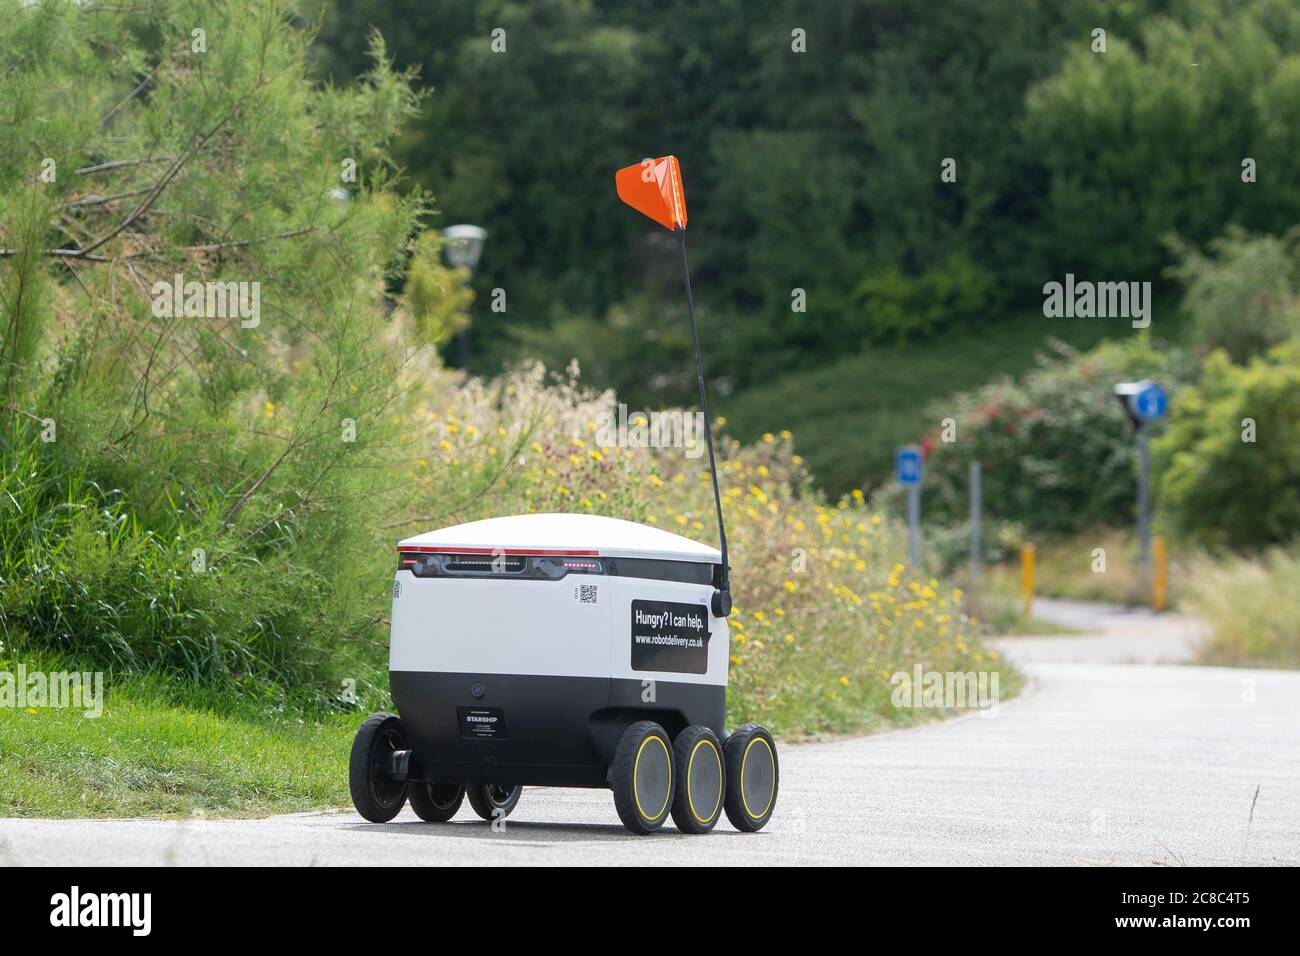 A Starship robot sets off from a Co-op store in Milton Keynes during a visit by Labour leader Keir Starmer to discuss technological innovation in response to the coronavirus pandemic. Stock Photo